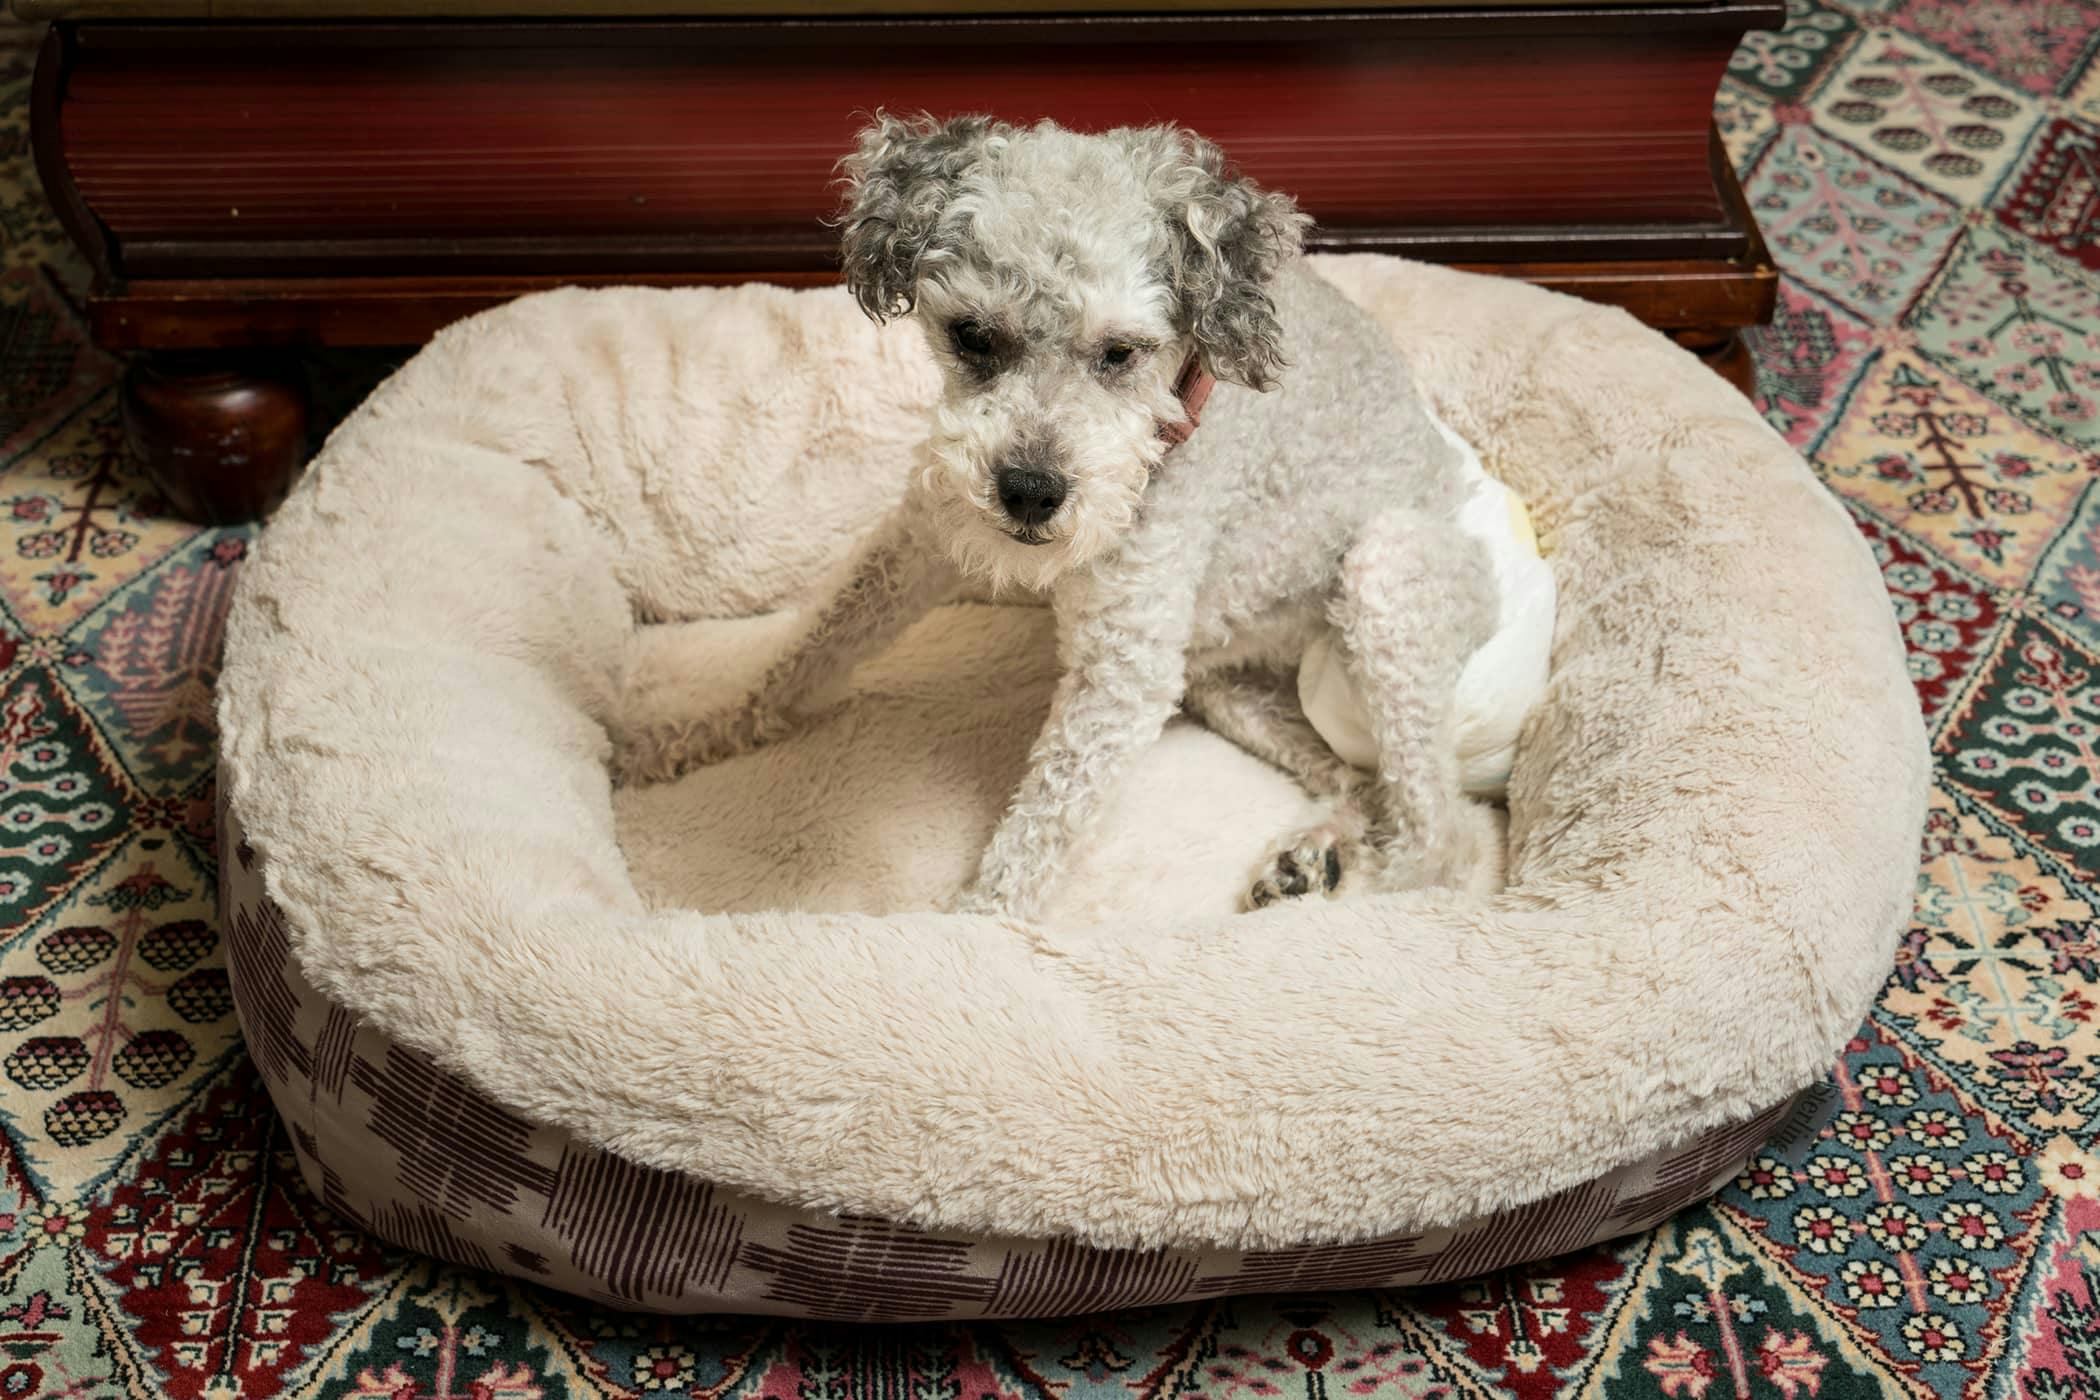 https://images.wagwalkingweb.com/media/articles/dog/why-is-my-dog-digging-in-her-bed/why-is-my-dog-digging-in-her-bed.jpg